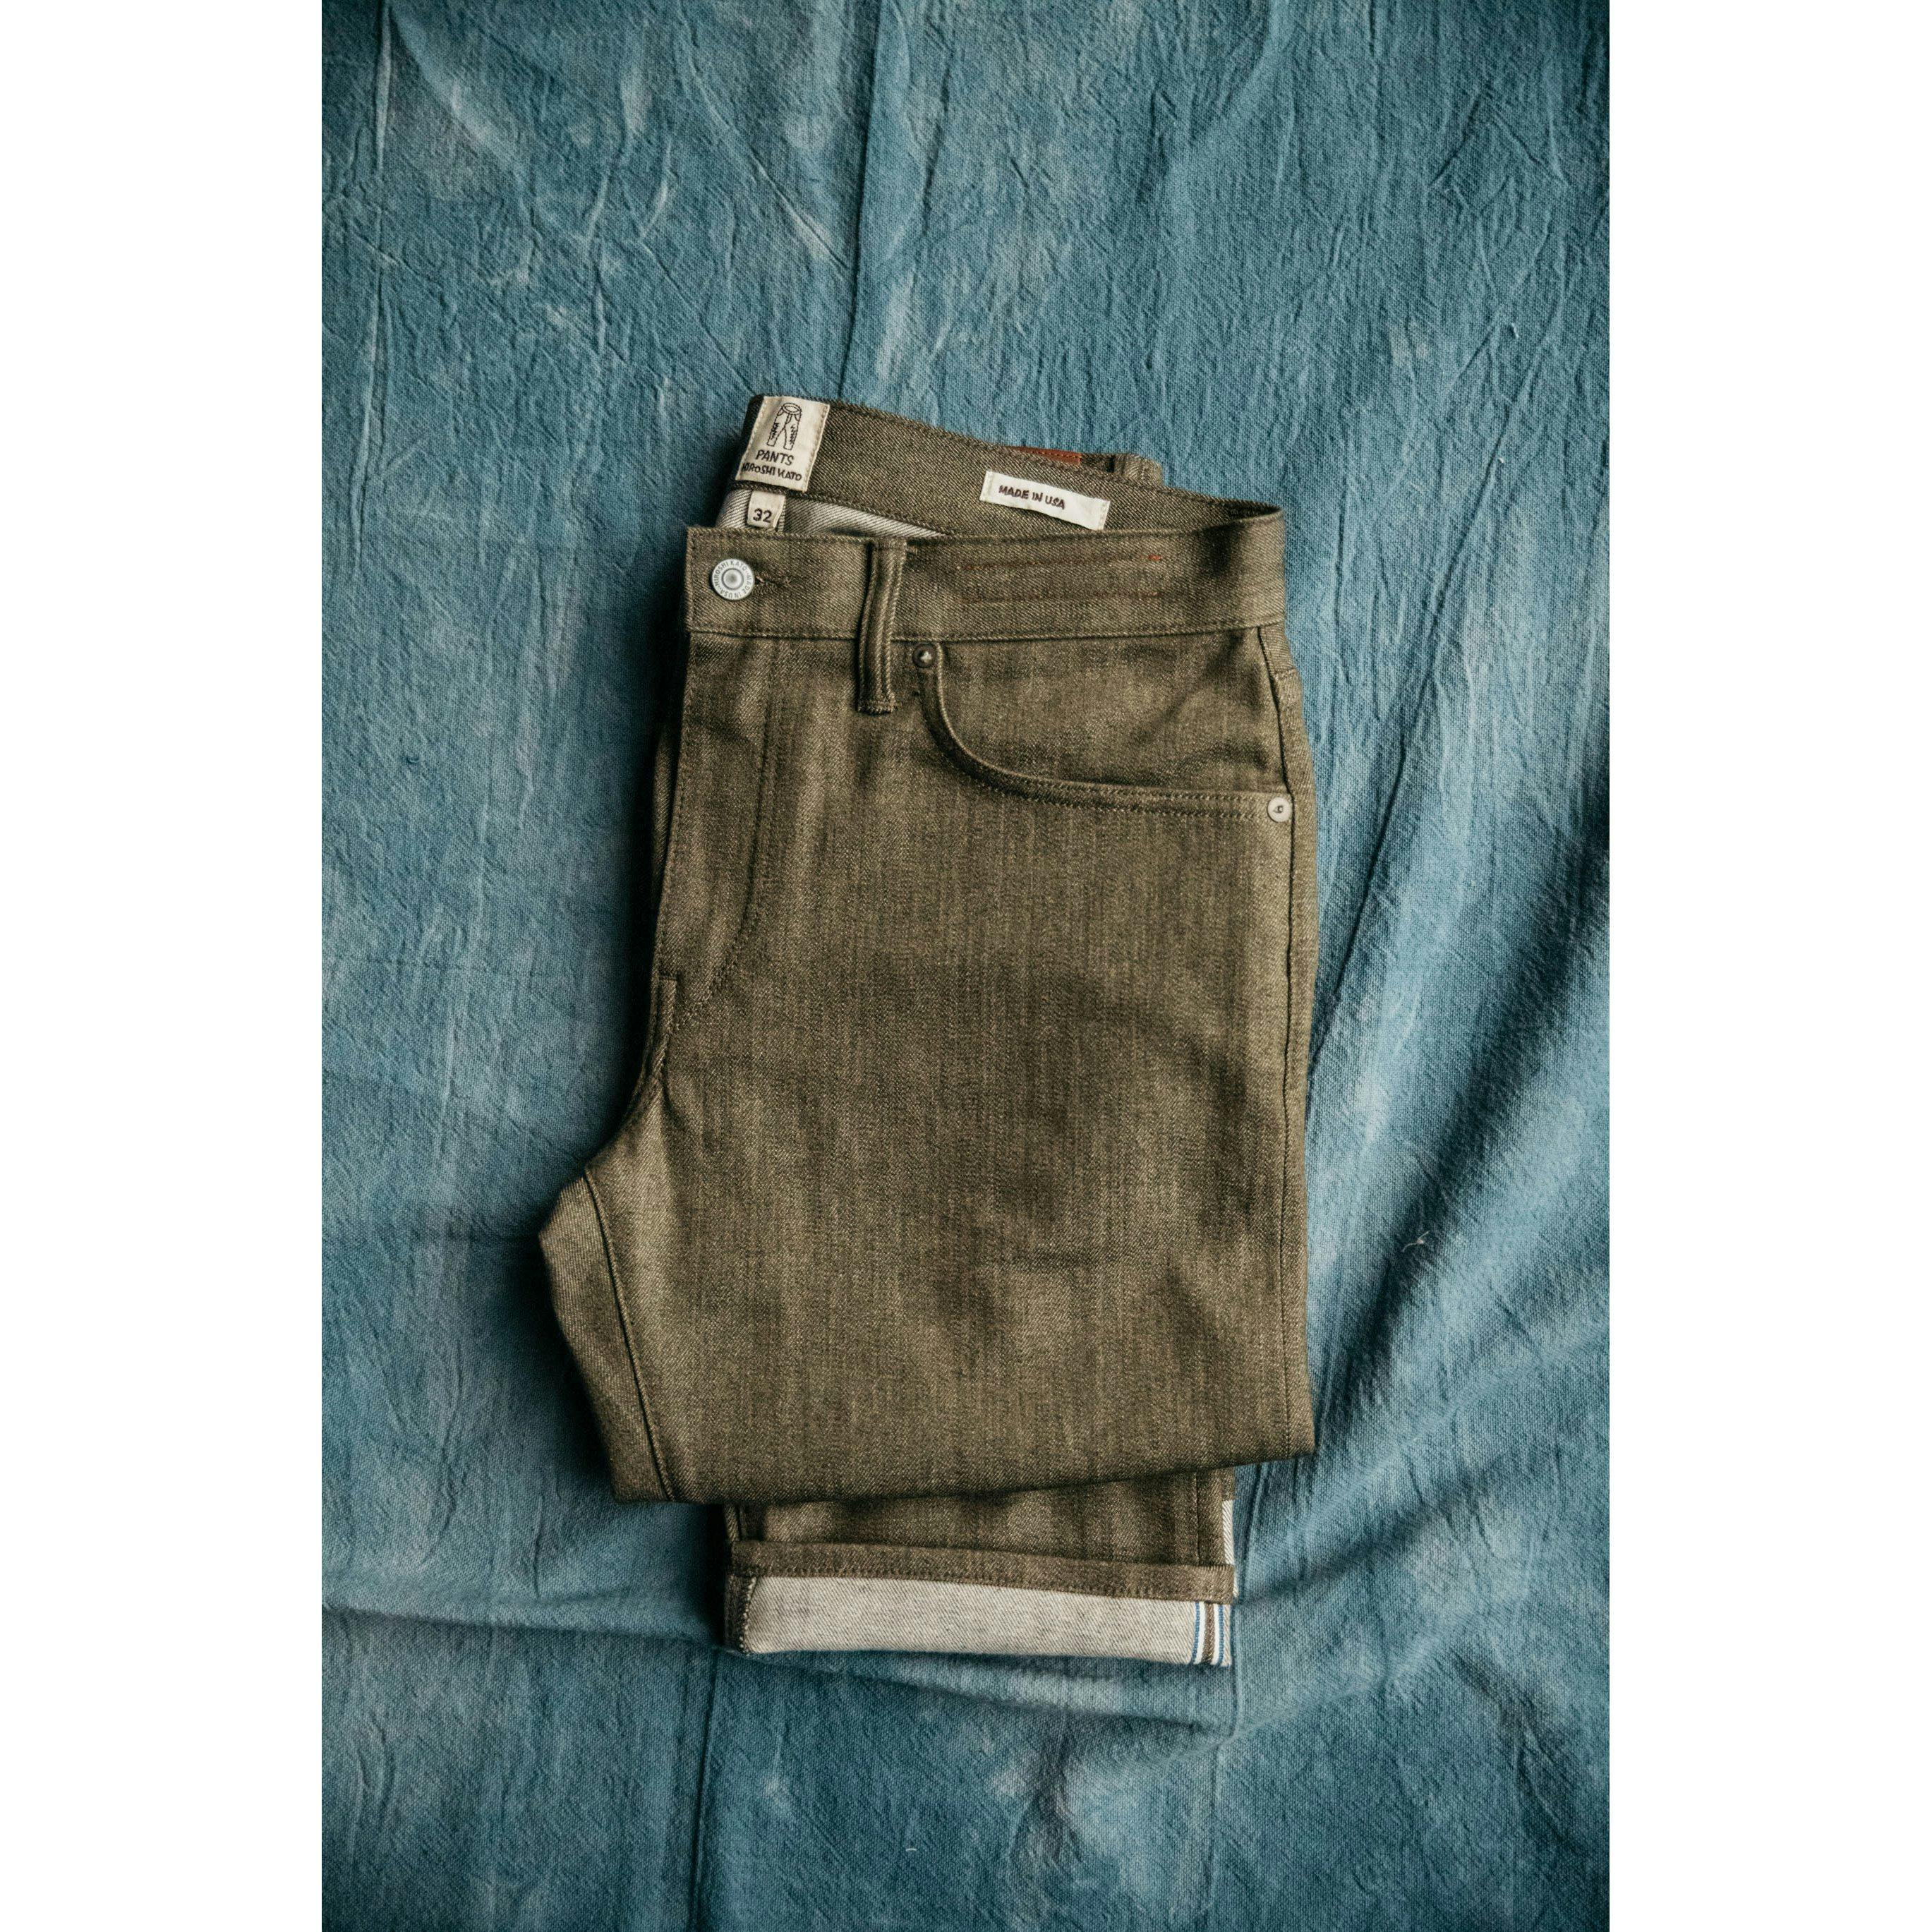 First attempt at Jeans- Slim Straight in 14oz Selvedge Denim : r